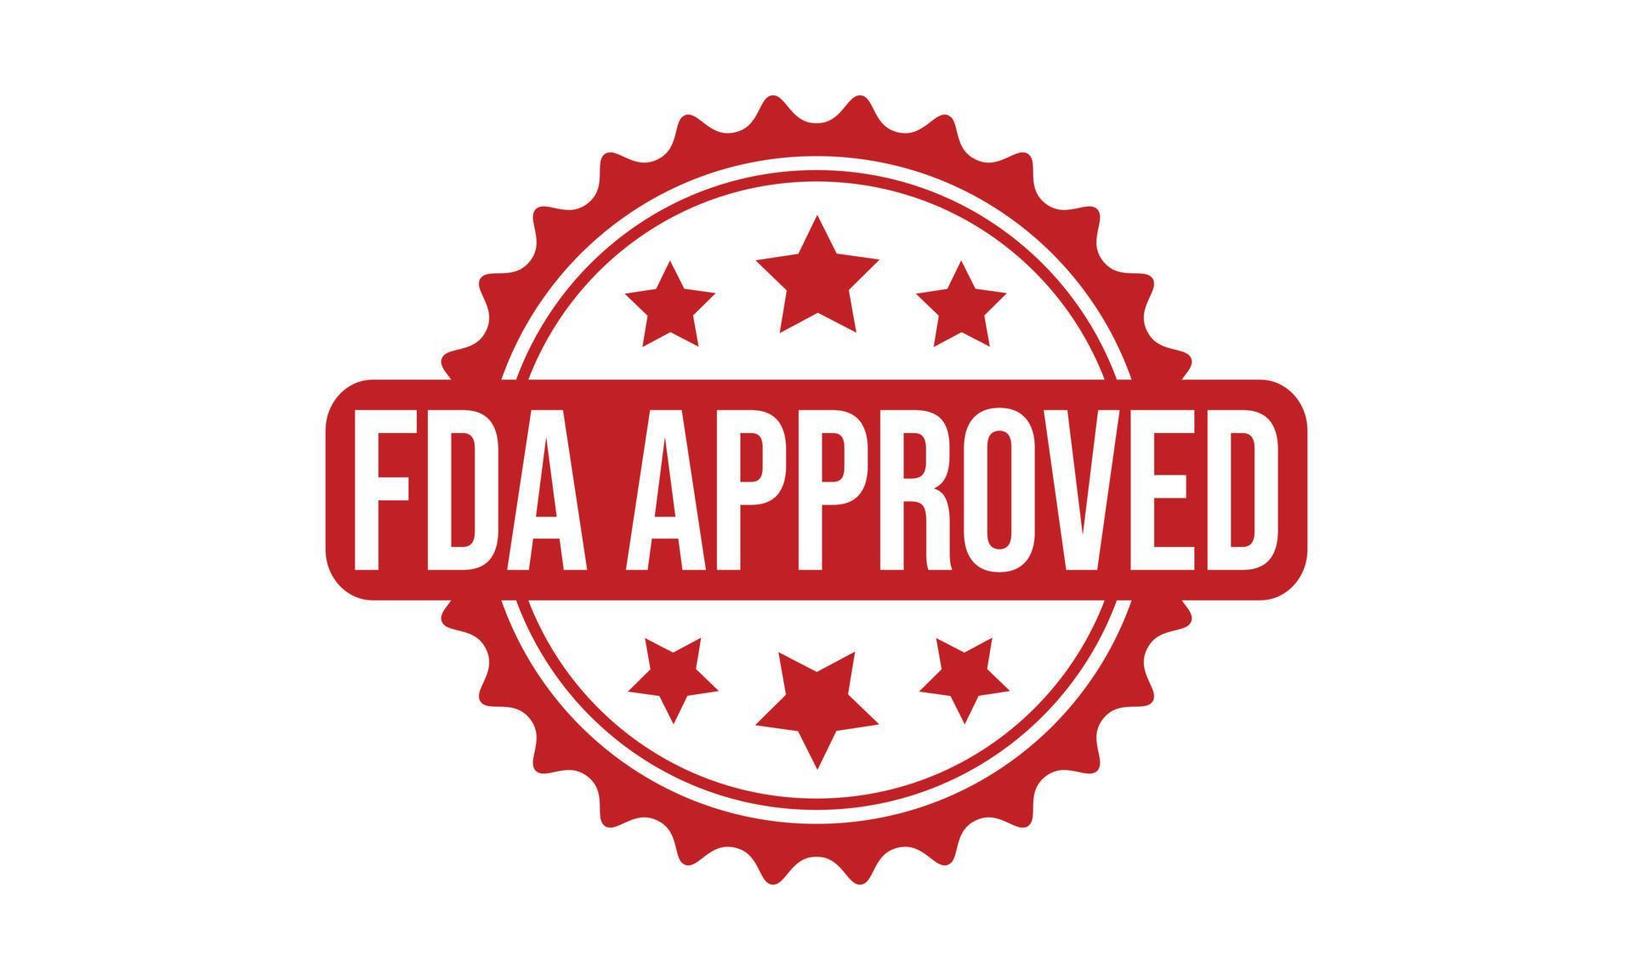 FDA Approved Rubber Stamp Seal Vector